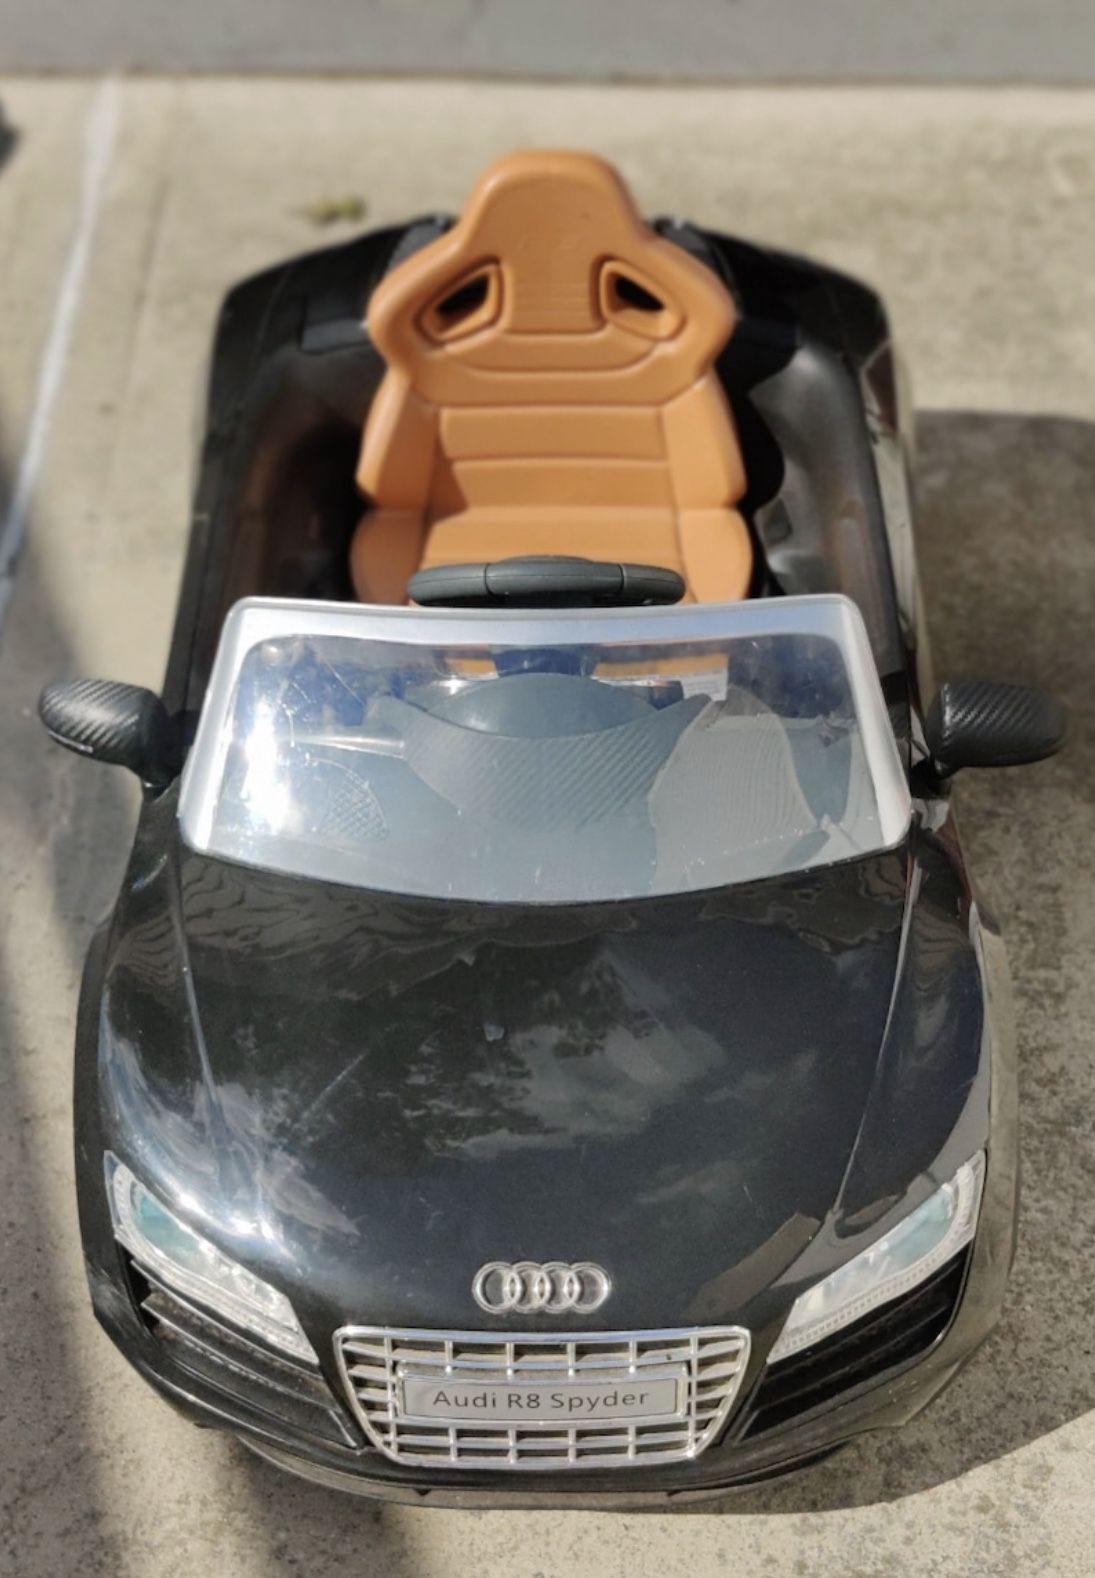 Electric powered ride on Audi R8 spyder for toddlers